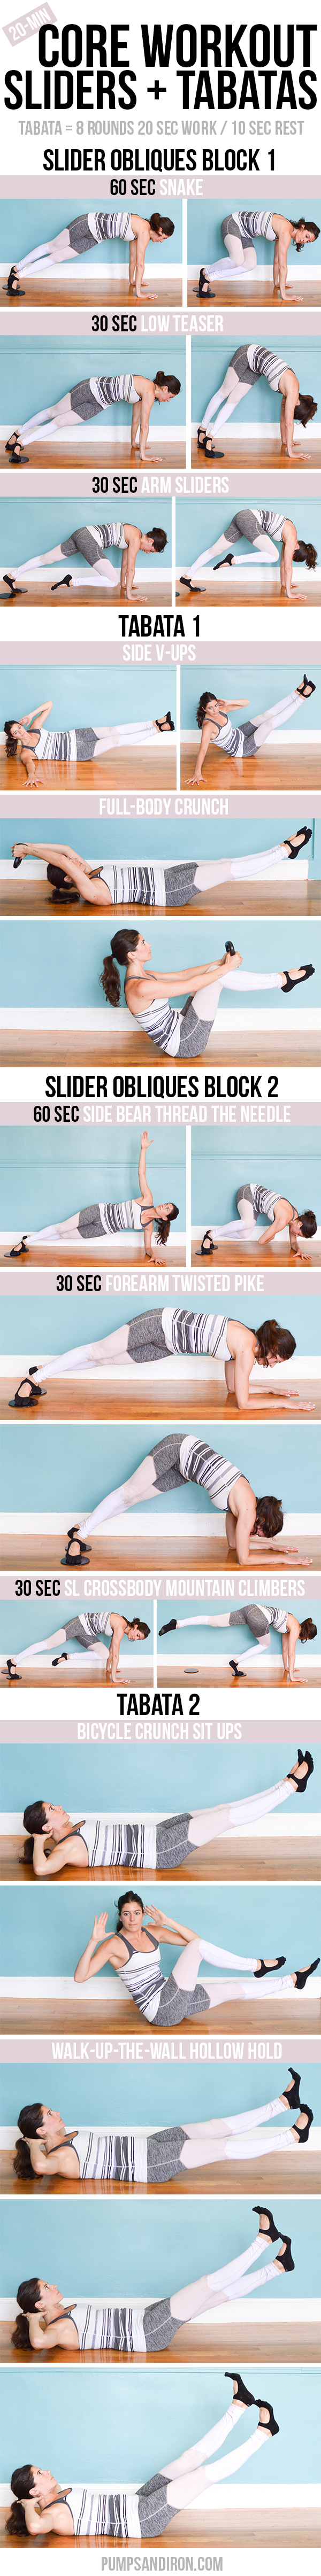 In this 20-minute core workout you'll alternate between slider blocks and tabata intervals.